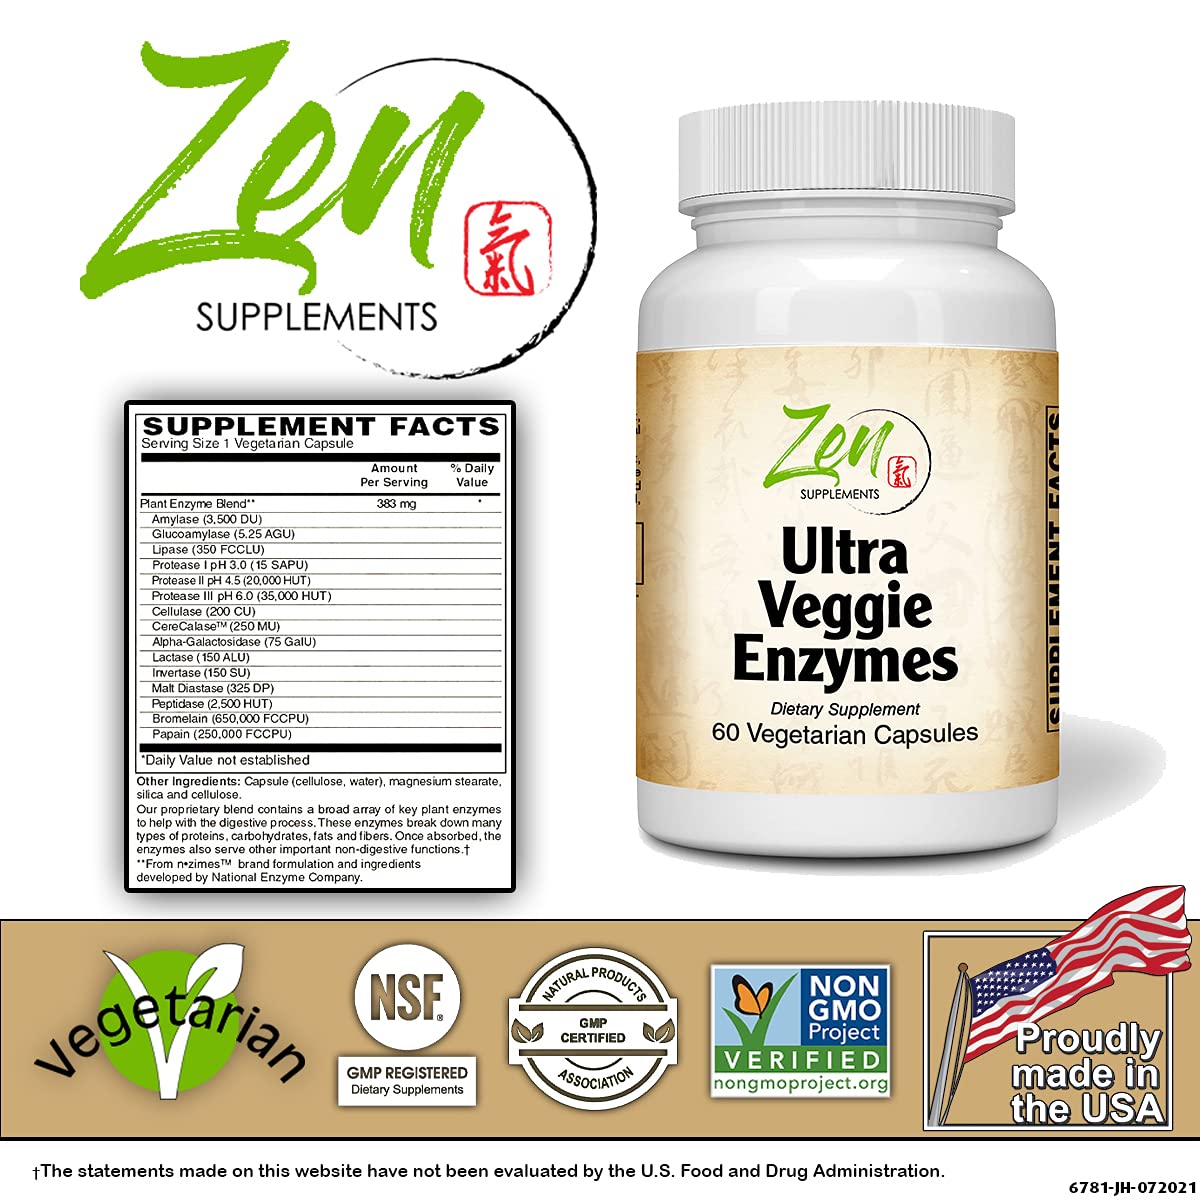 Zen Supplements - Ultra Veggie Enzymes for Vegetarians and Vegans - Promotes Digestion of Vegetables, Beans and Carbohydrates to Help Reduce Occasional Gas and Bloating 60-Vegcaps